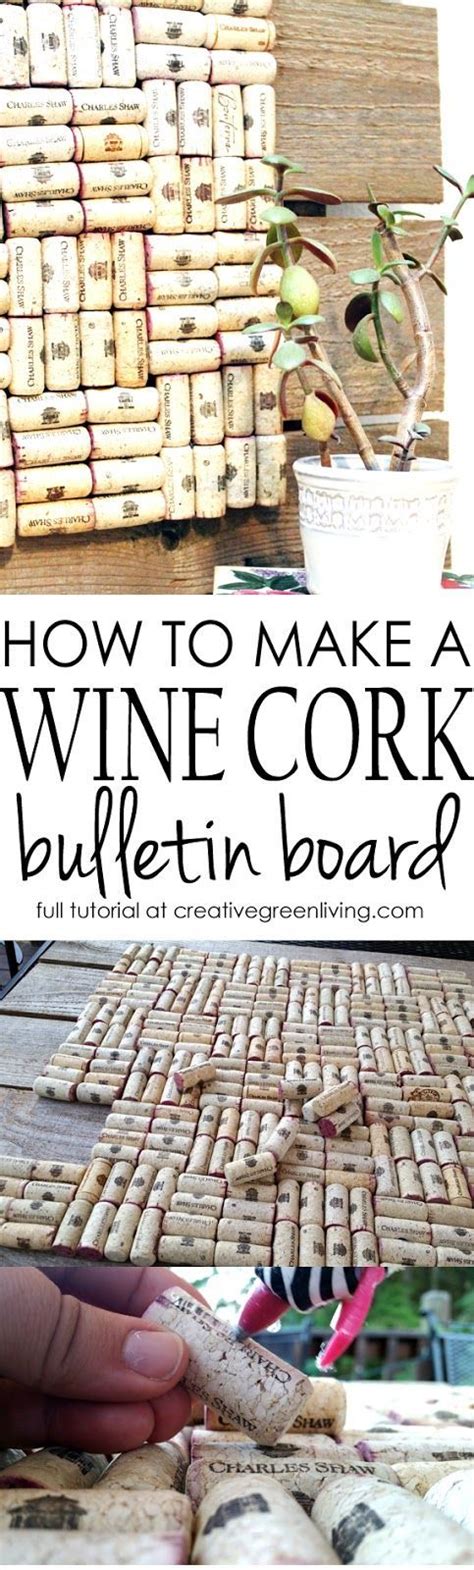 How To Recycle Used Wine Corks Into A Rustic Bulletin Board Wine Cork